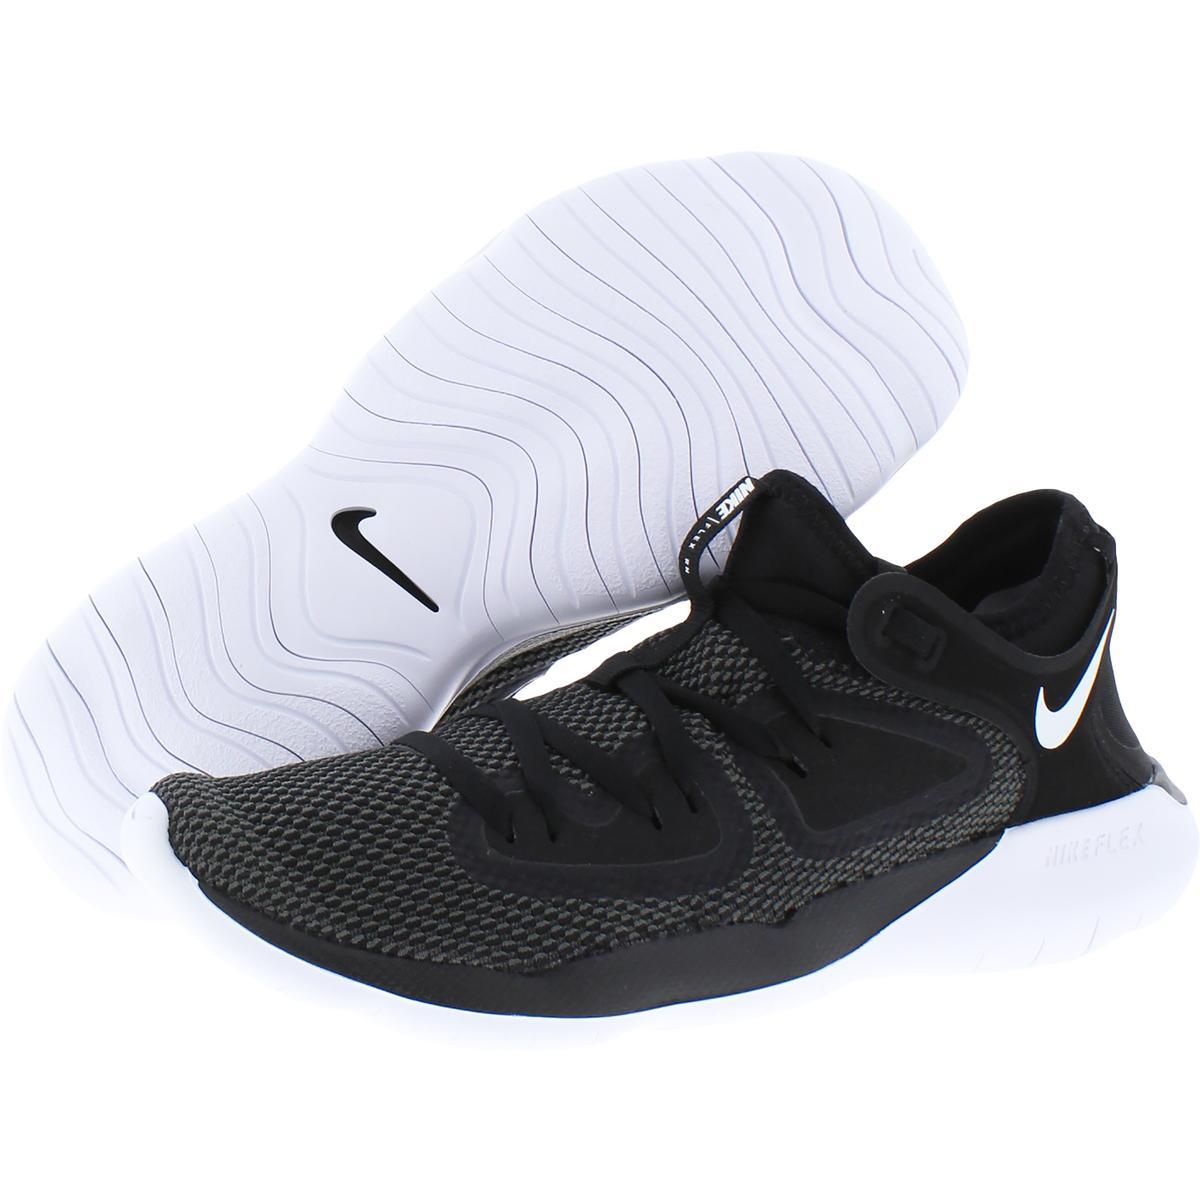 Nike Flex 2019 Rn Lifestyle Active Running Shoes in Black | Lyst